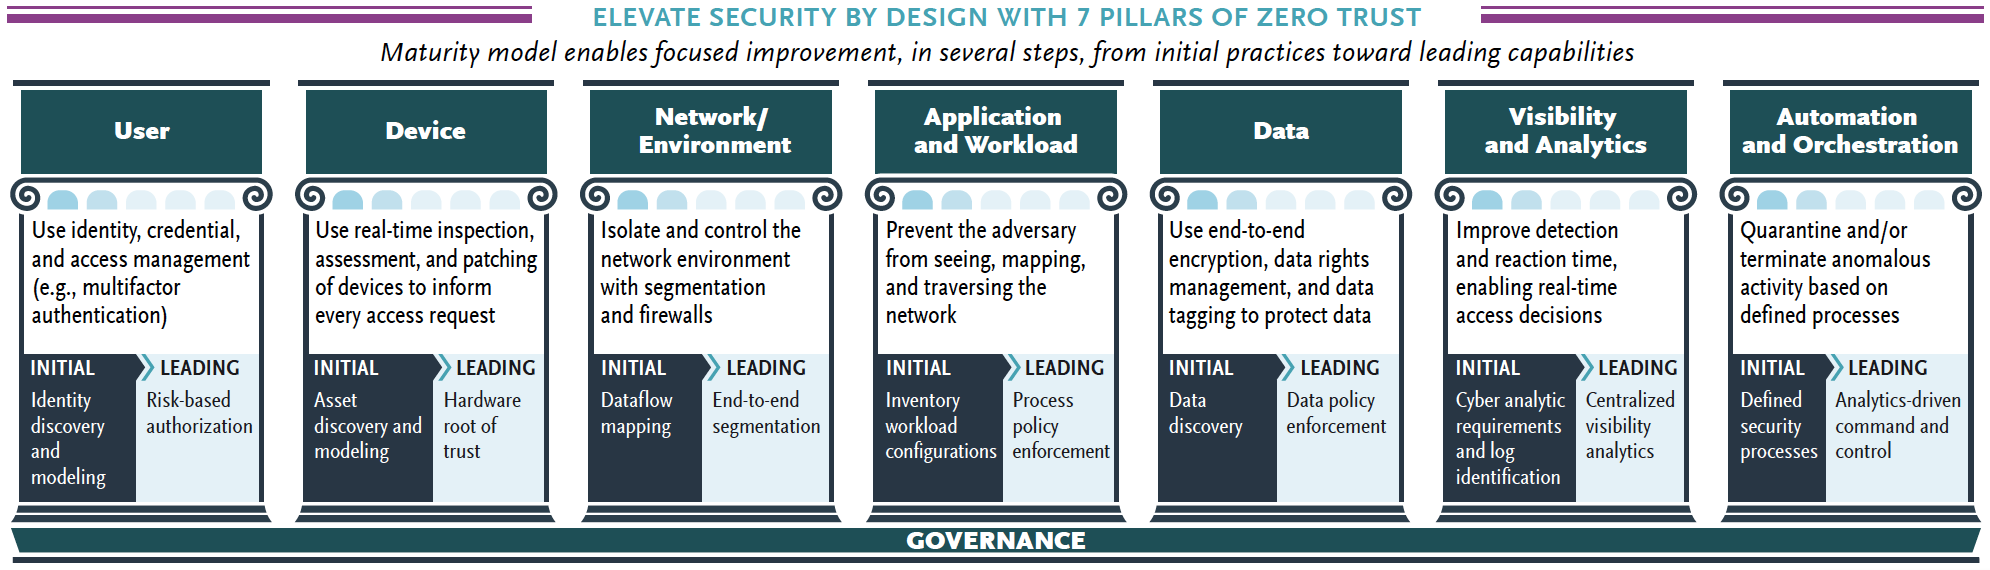 Elevate security by design with 7 pillars of Zero Trust: User, Device, Network/Environment, Application and Workload, Data, Visibility and Analytics, and Automation and Orchestration.